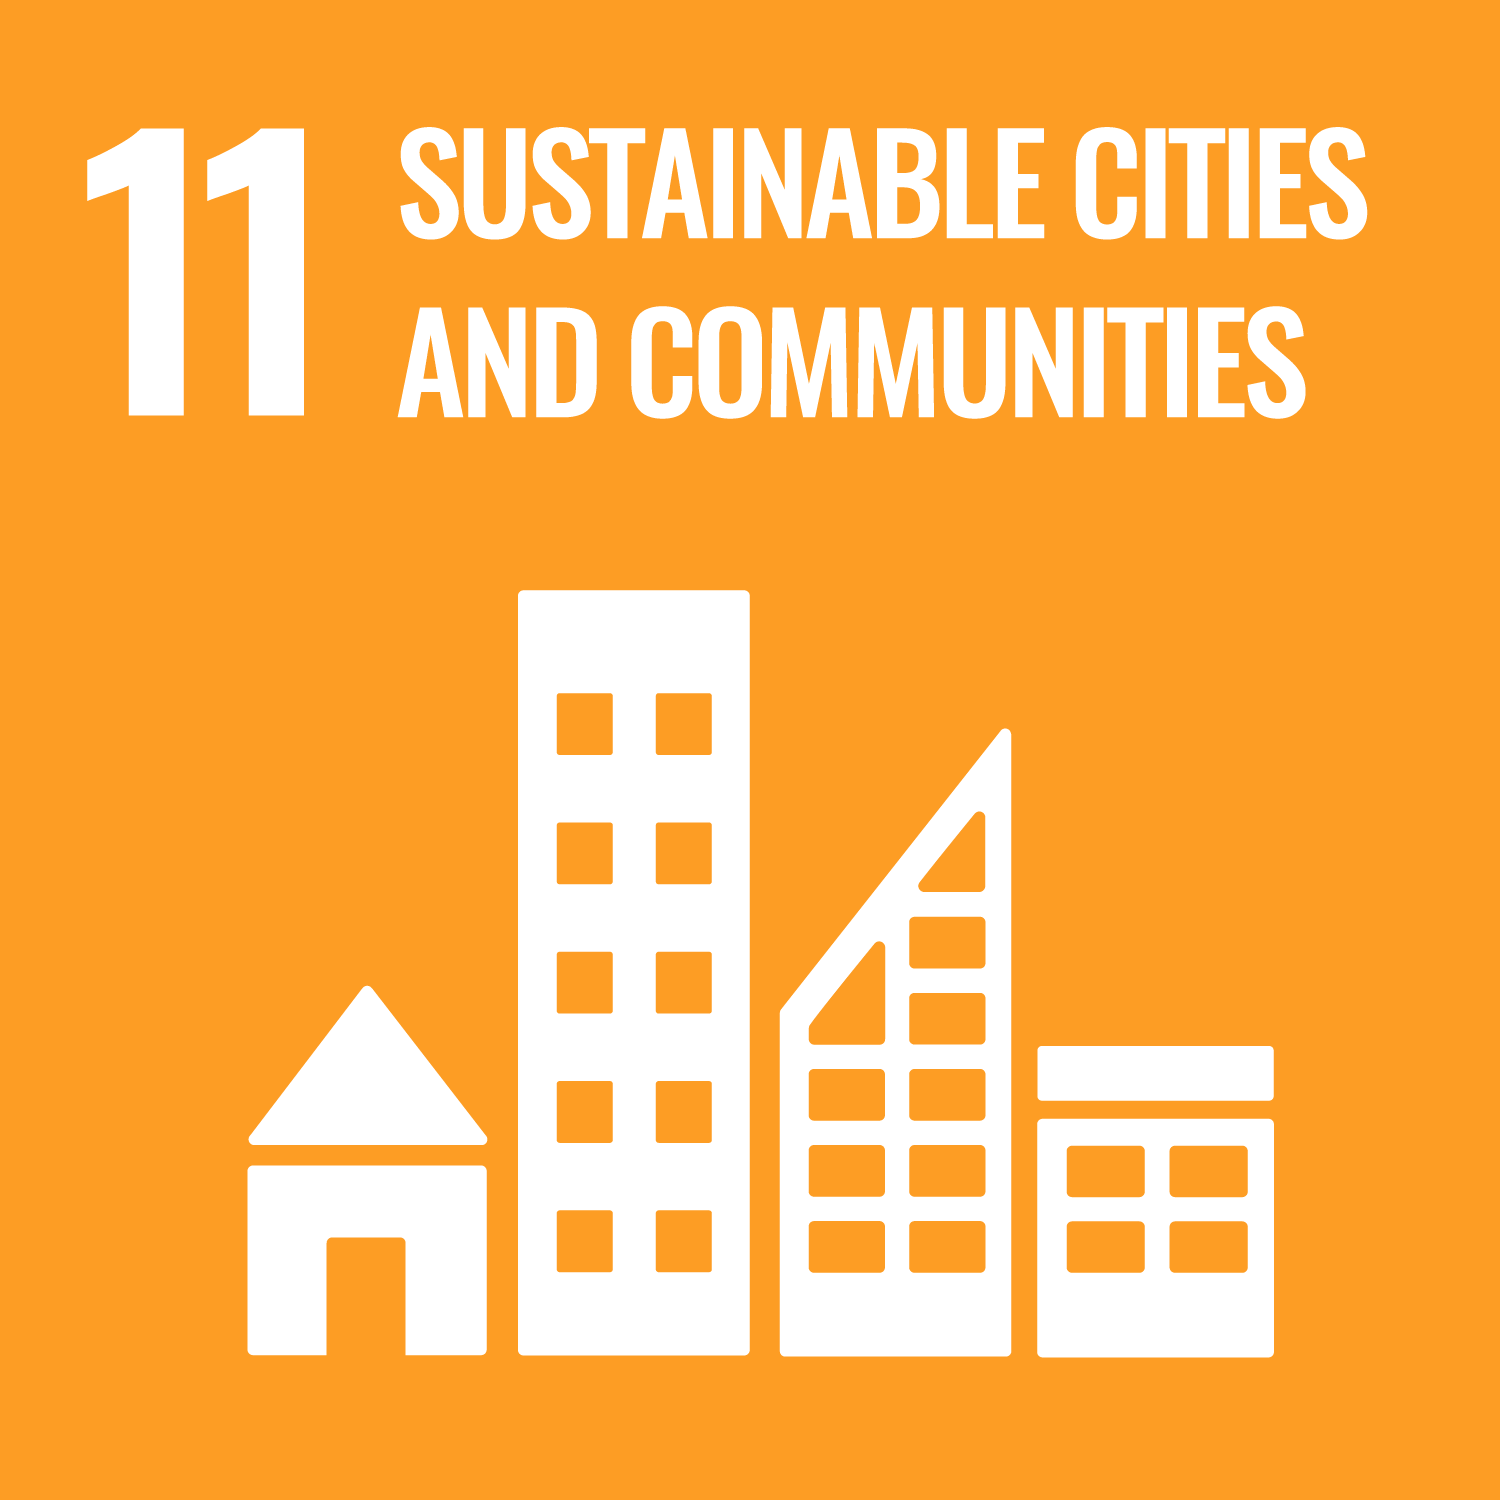 SDGs 永續城鄉-Sustainable Cities and Communities圖示